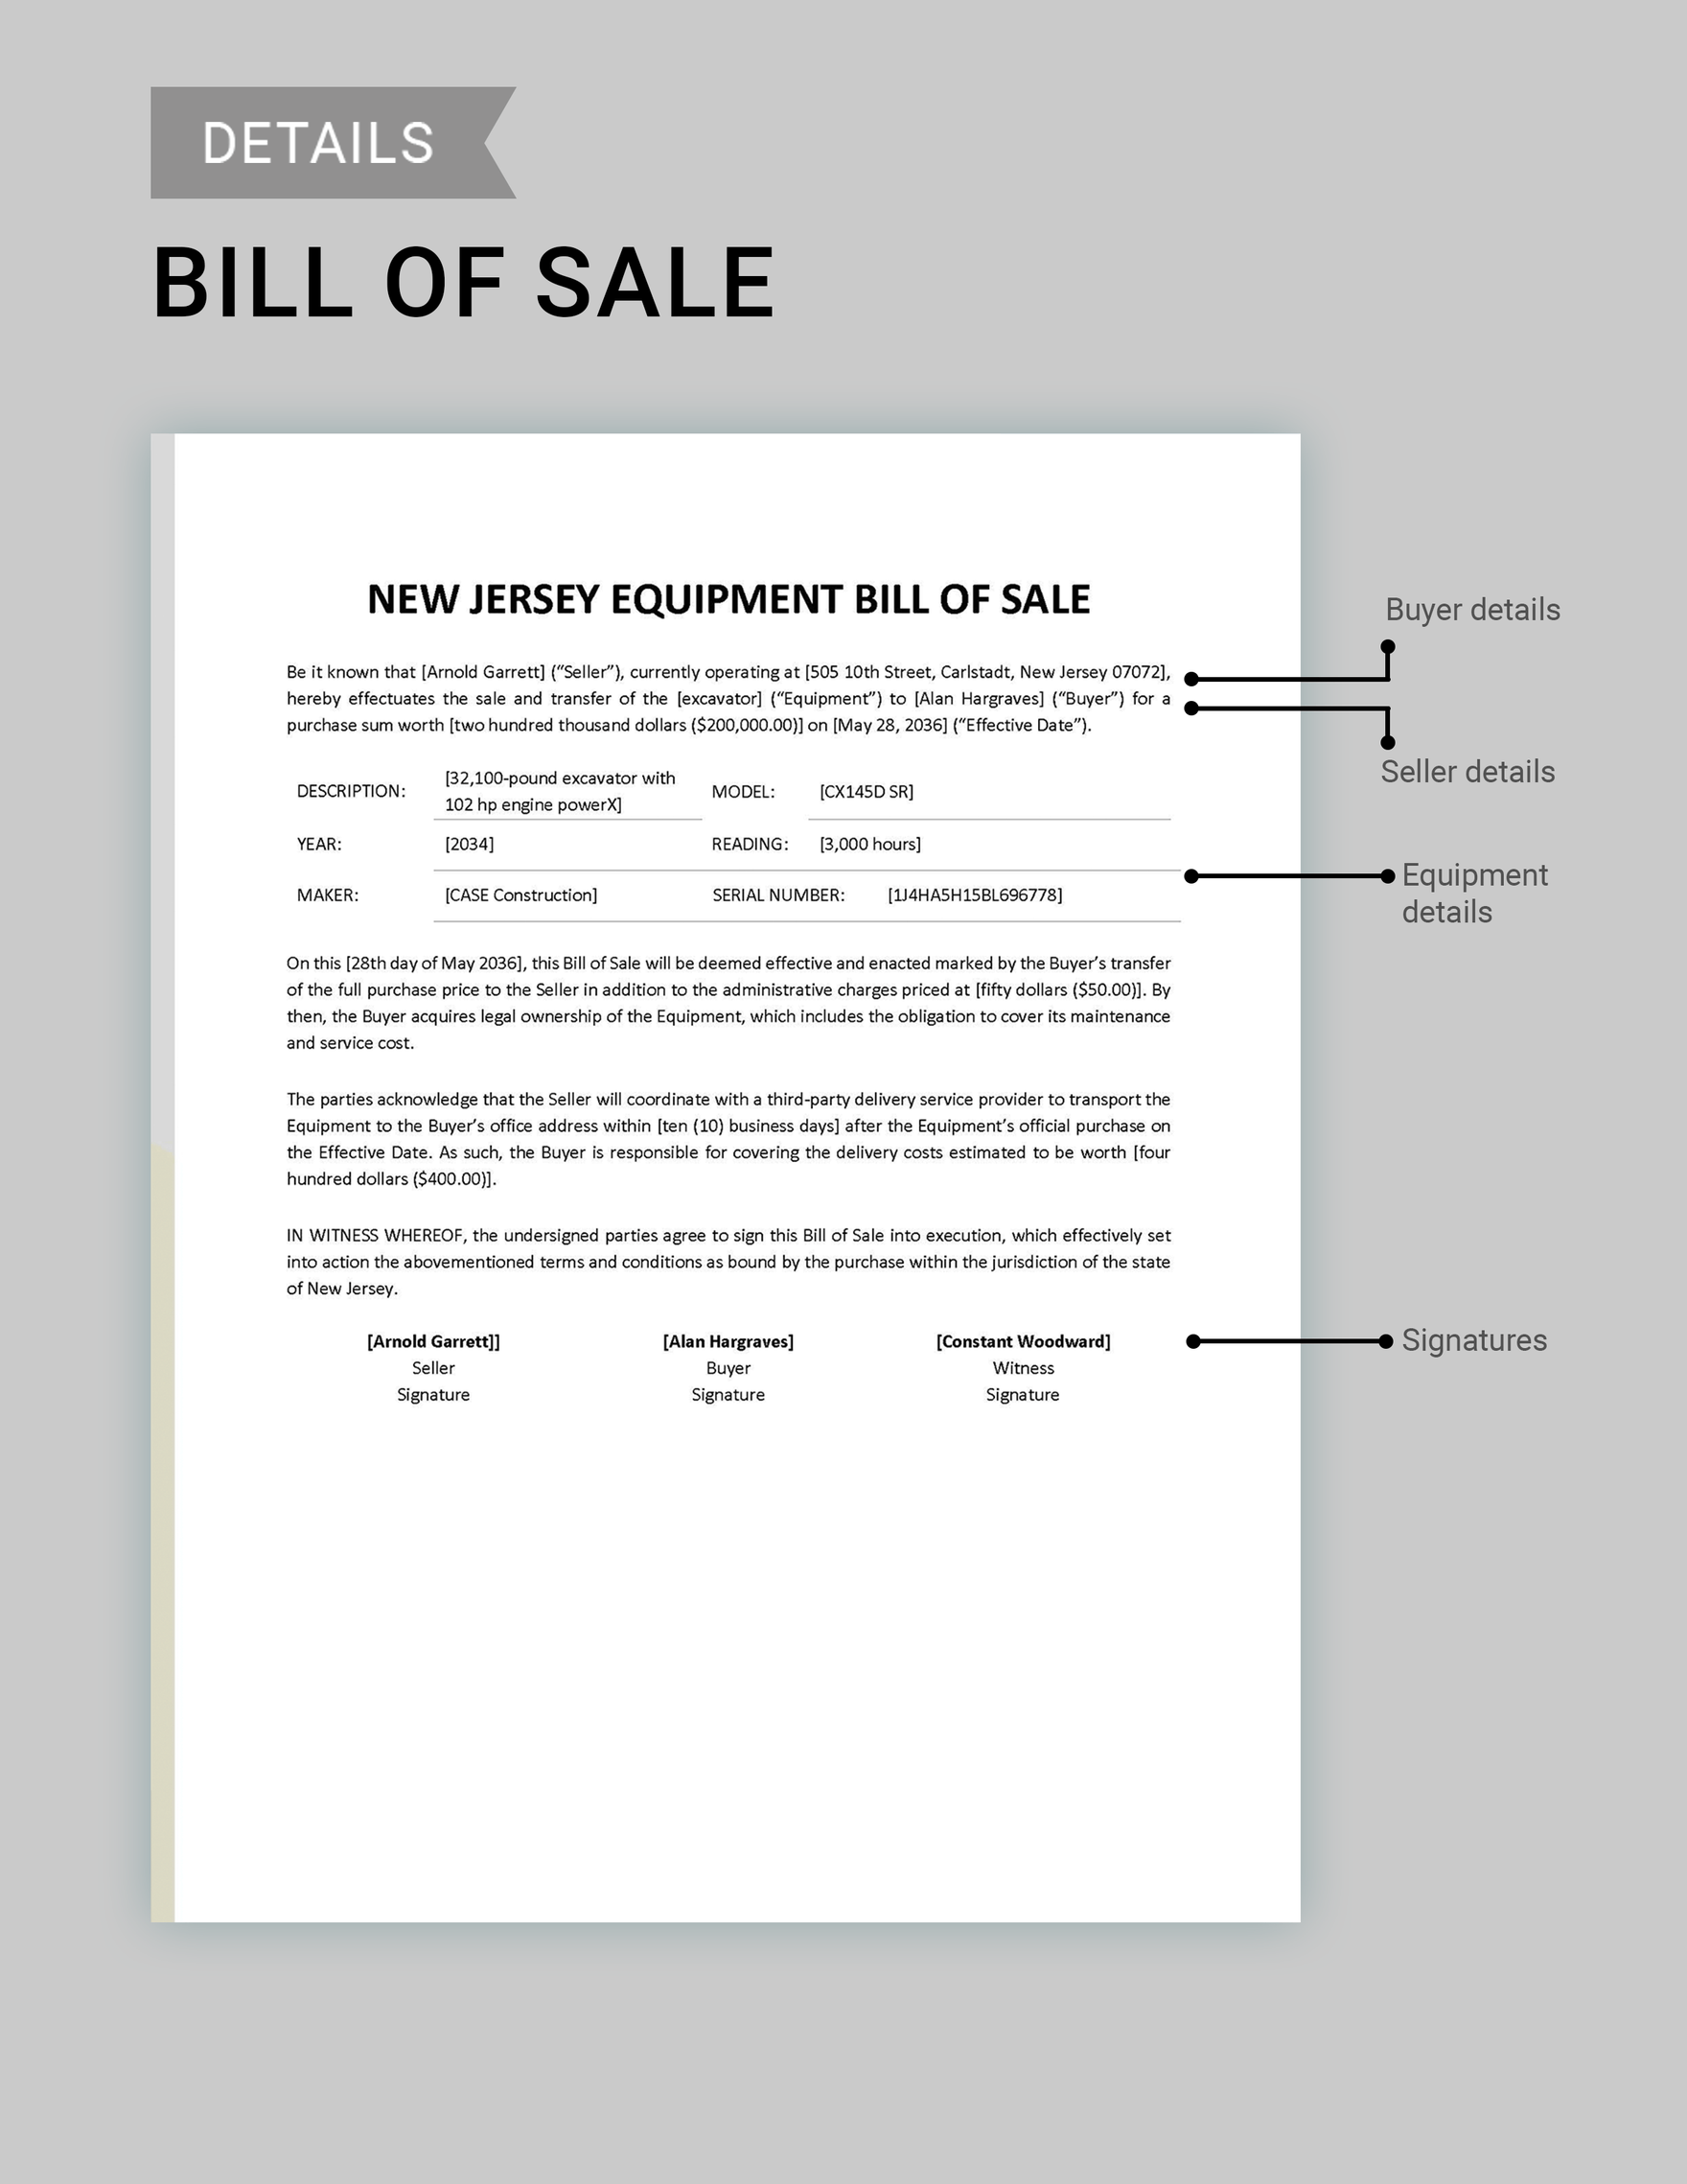 New Jersey Equipment Bill of Sale Form Template